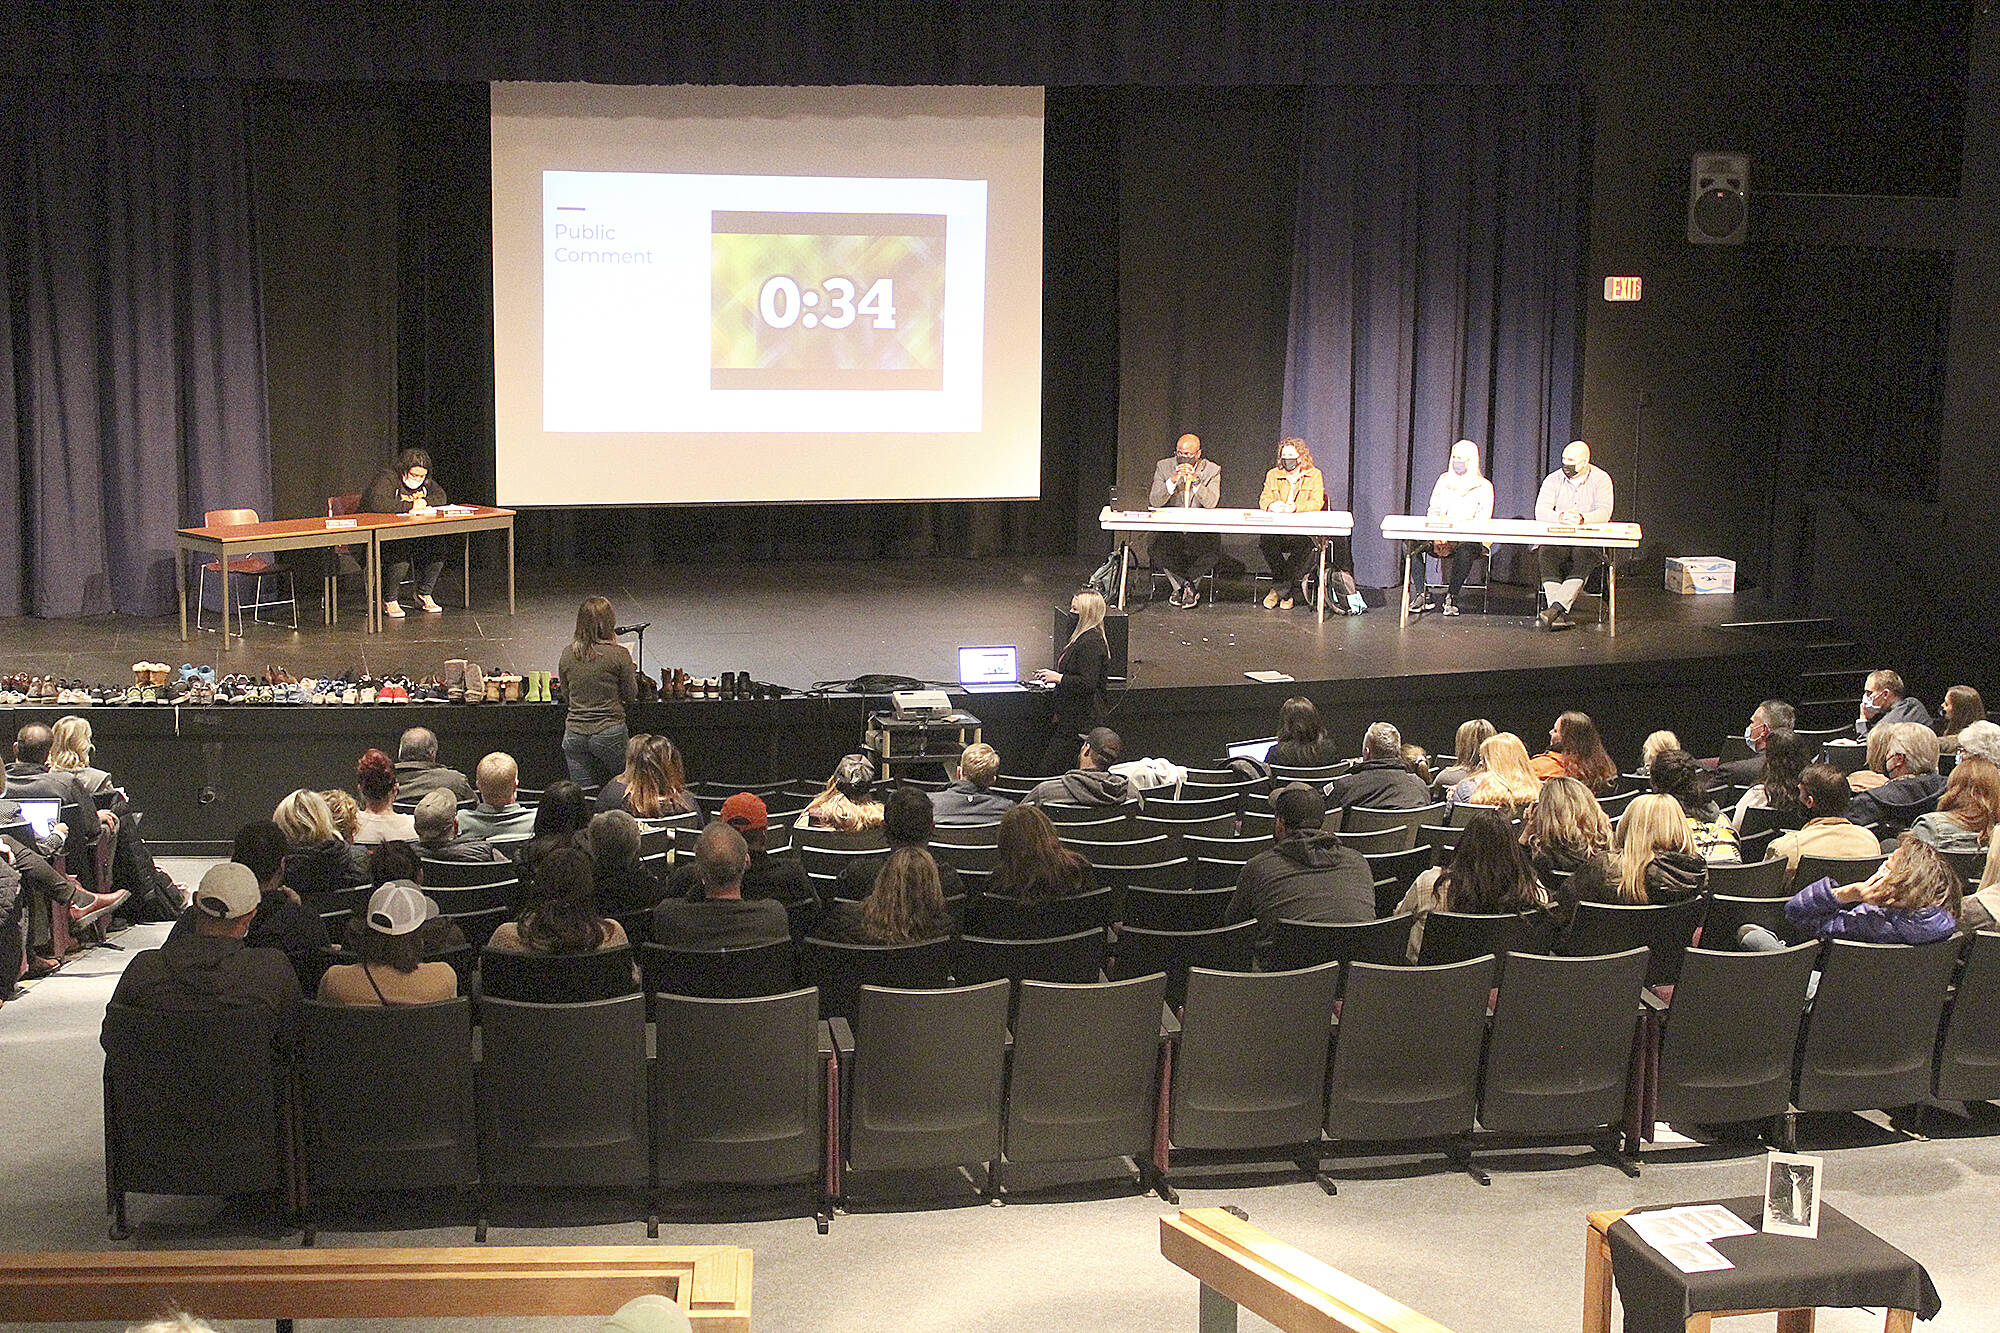 So many people wanted to attend the Nov. 22 school board meeting that the venue had to change from the high school library to the auditoriu. Photo by Ray Miller-Still